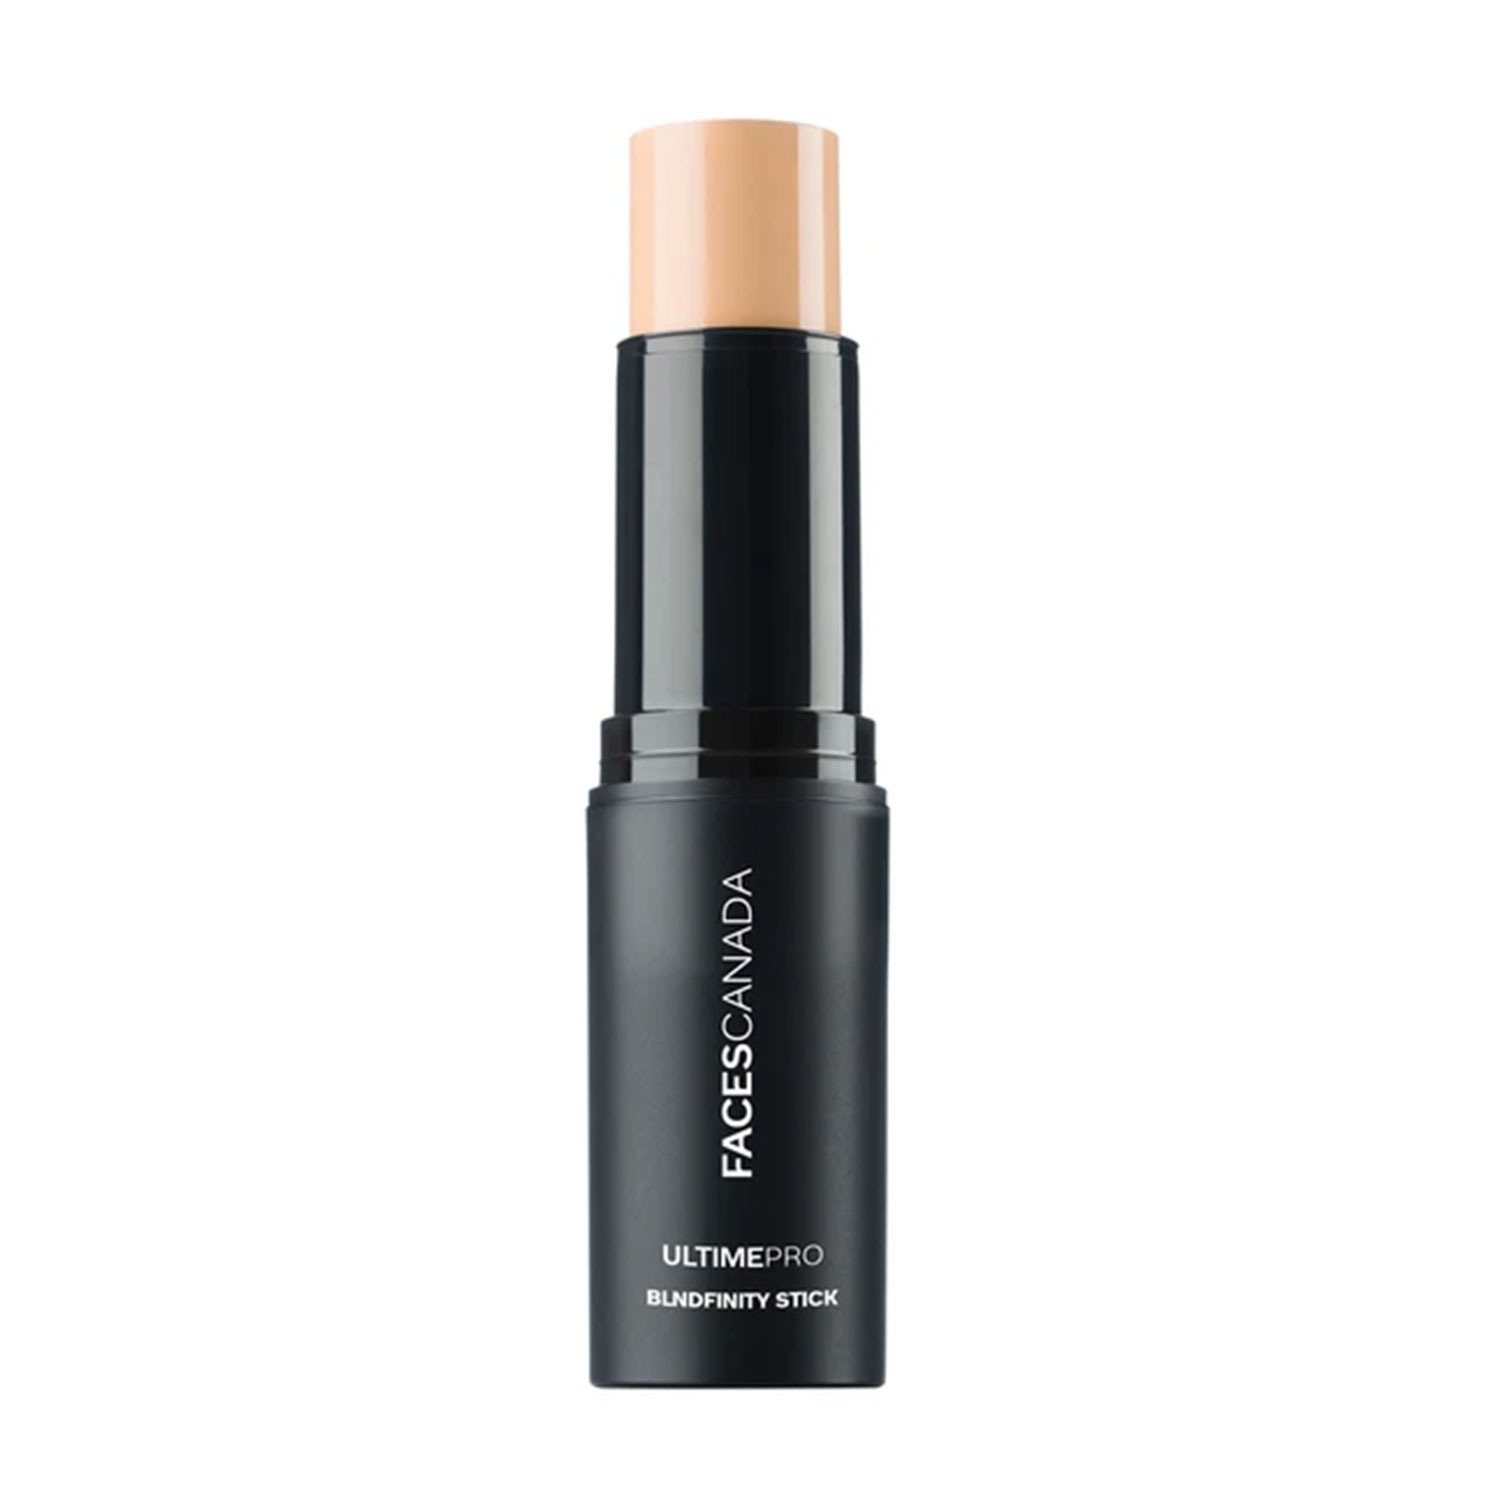 Faces Canada Ultime Pro BlendFinity Stick Foundation, 10gm-Ivory 01